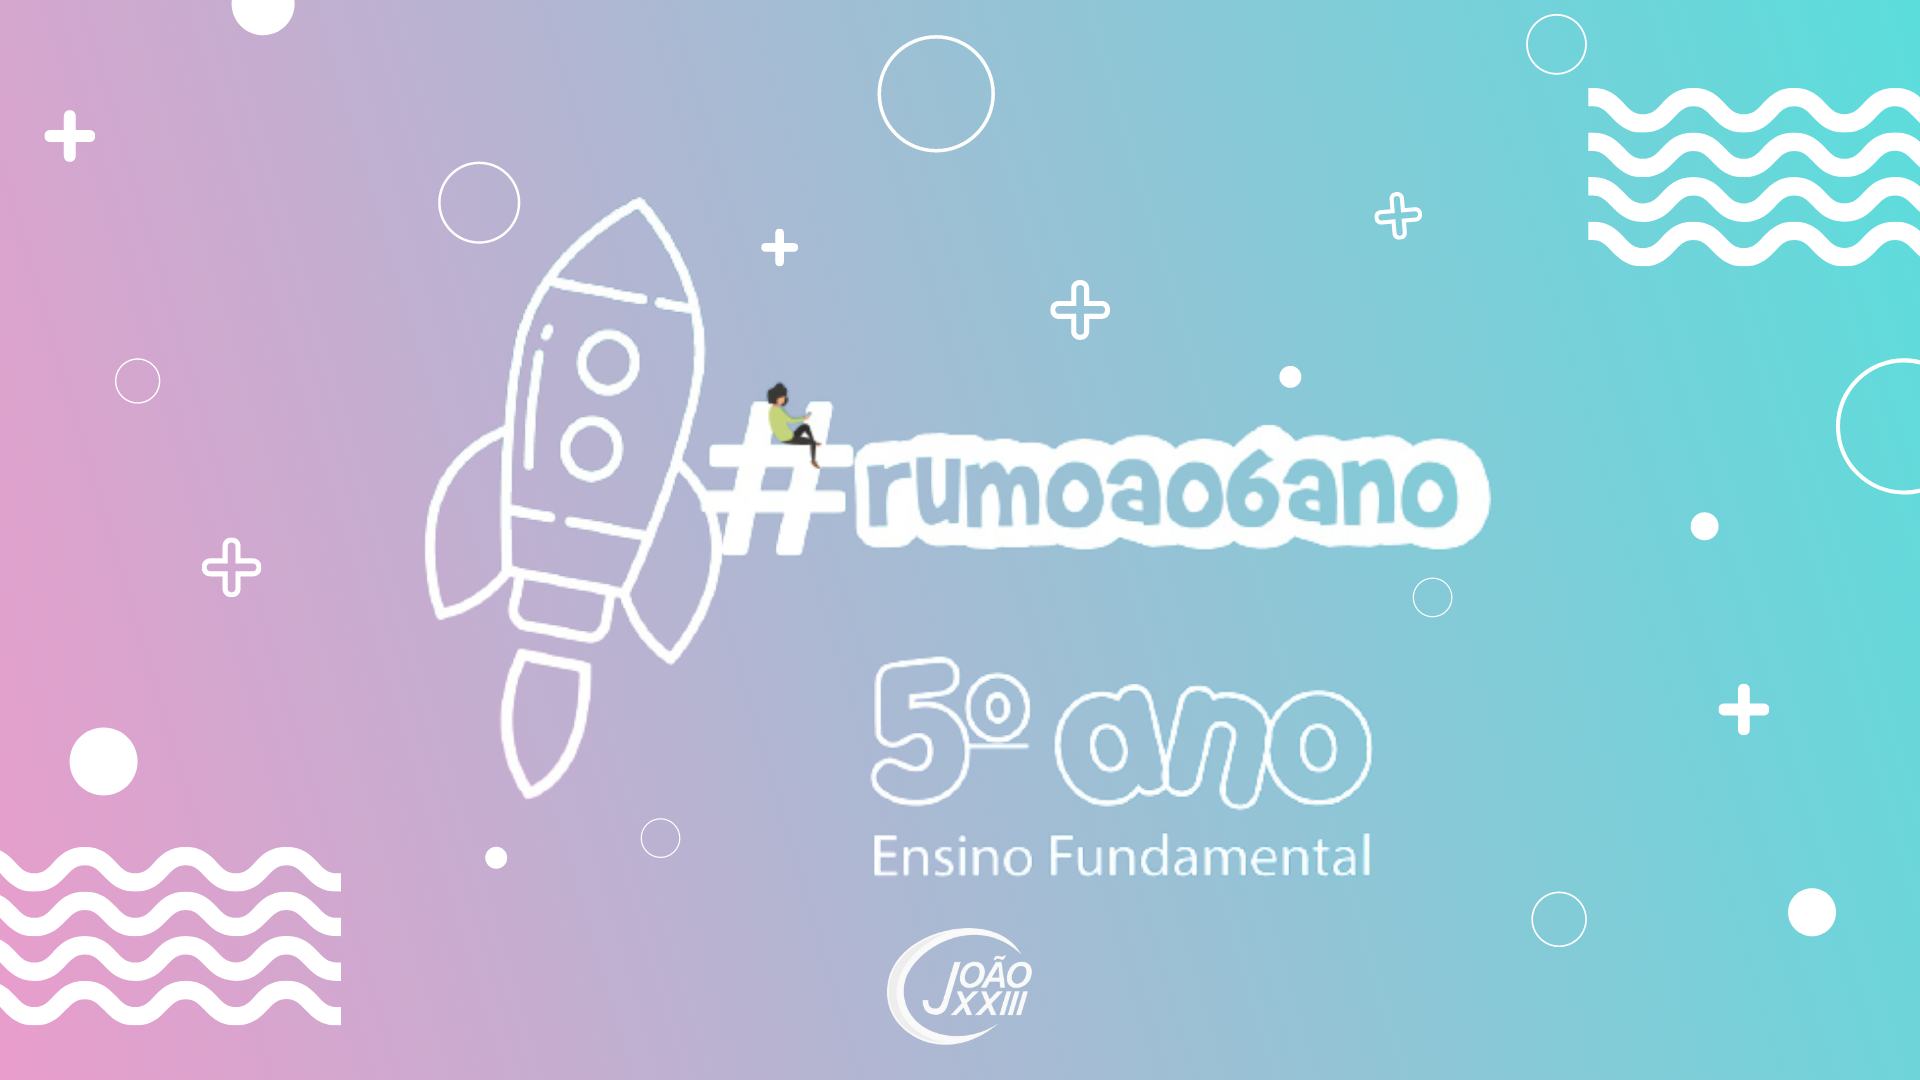 You are currently viewing Rumo ao 6º ano